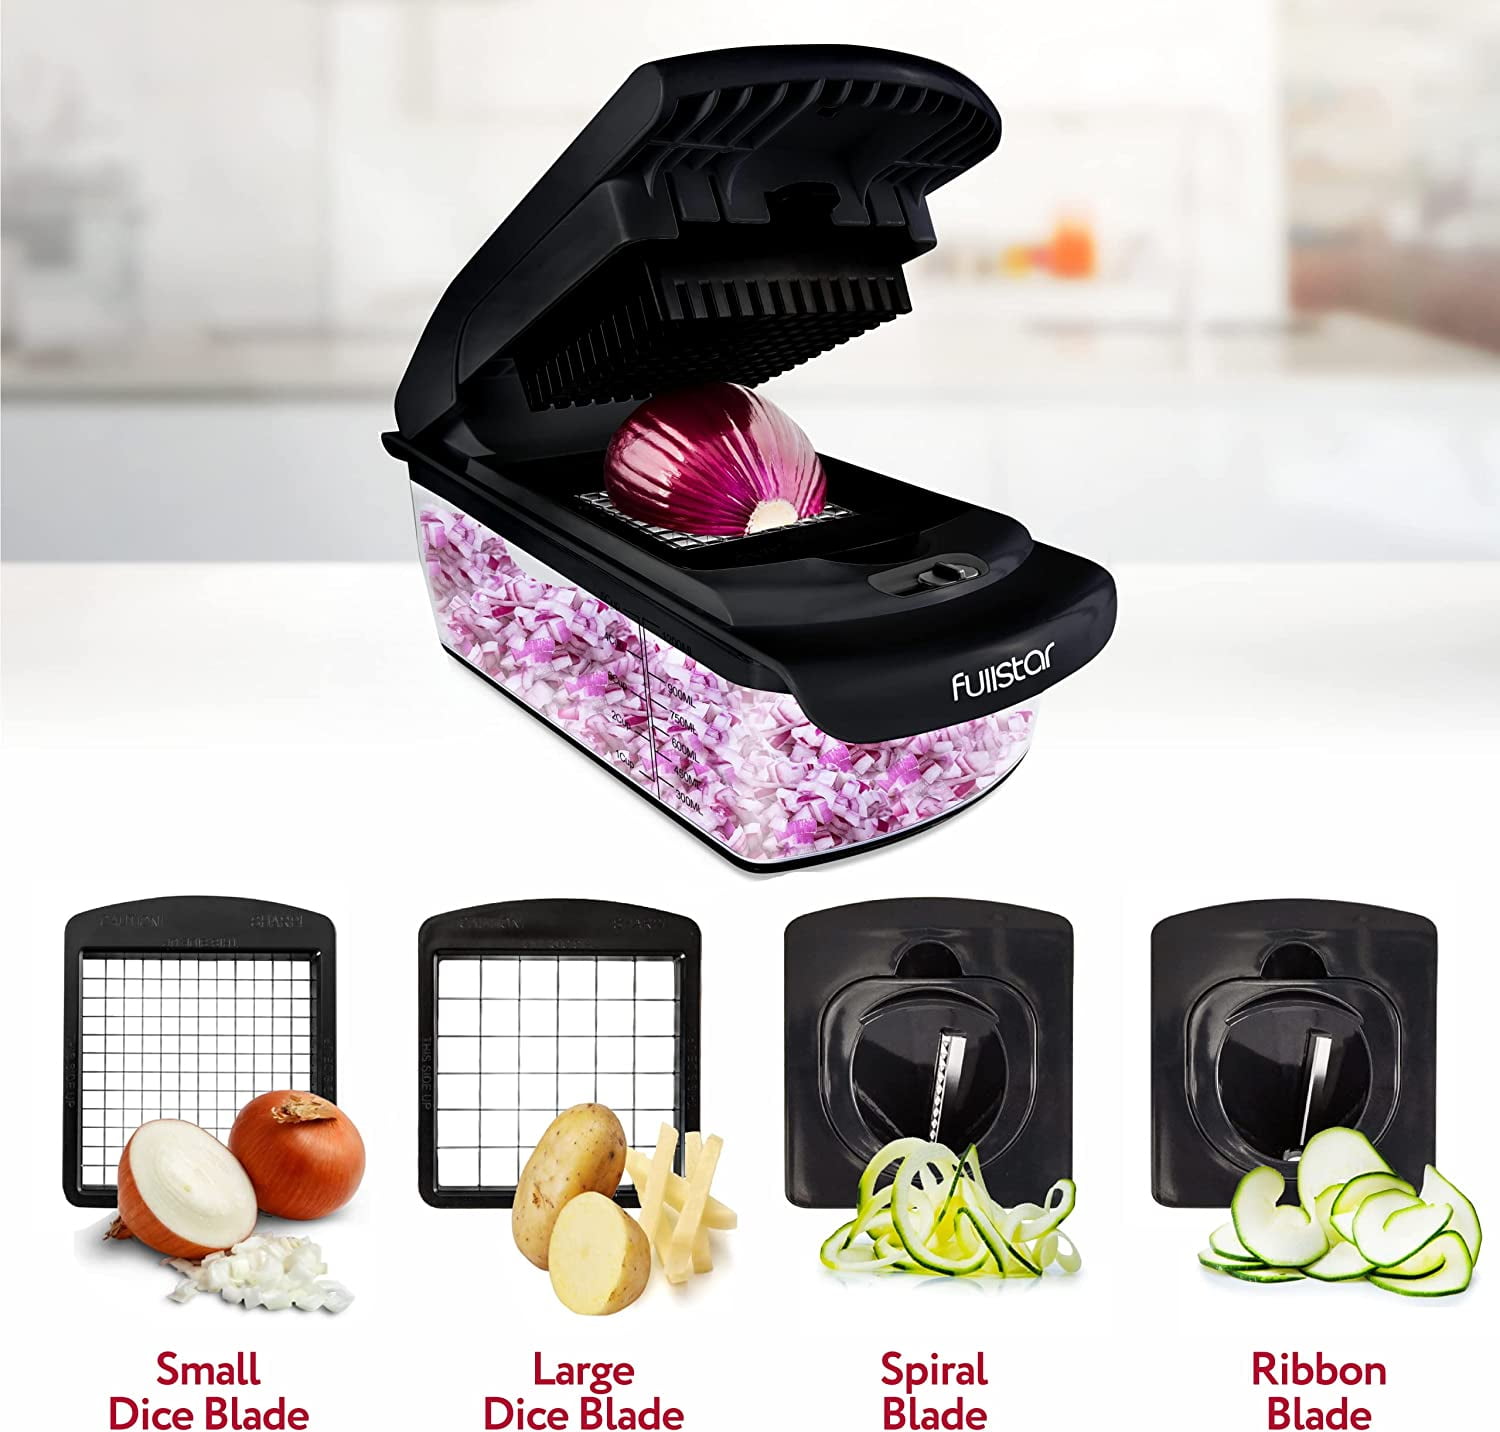 Dice All Your Veggies With A Fullstar Vegetable Chopper With 10% Off